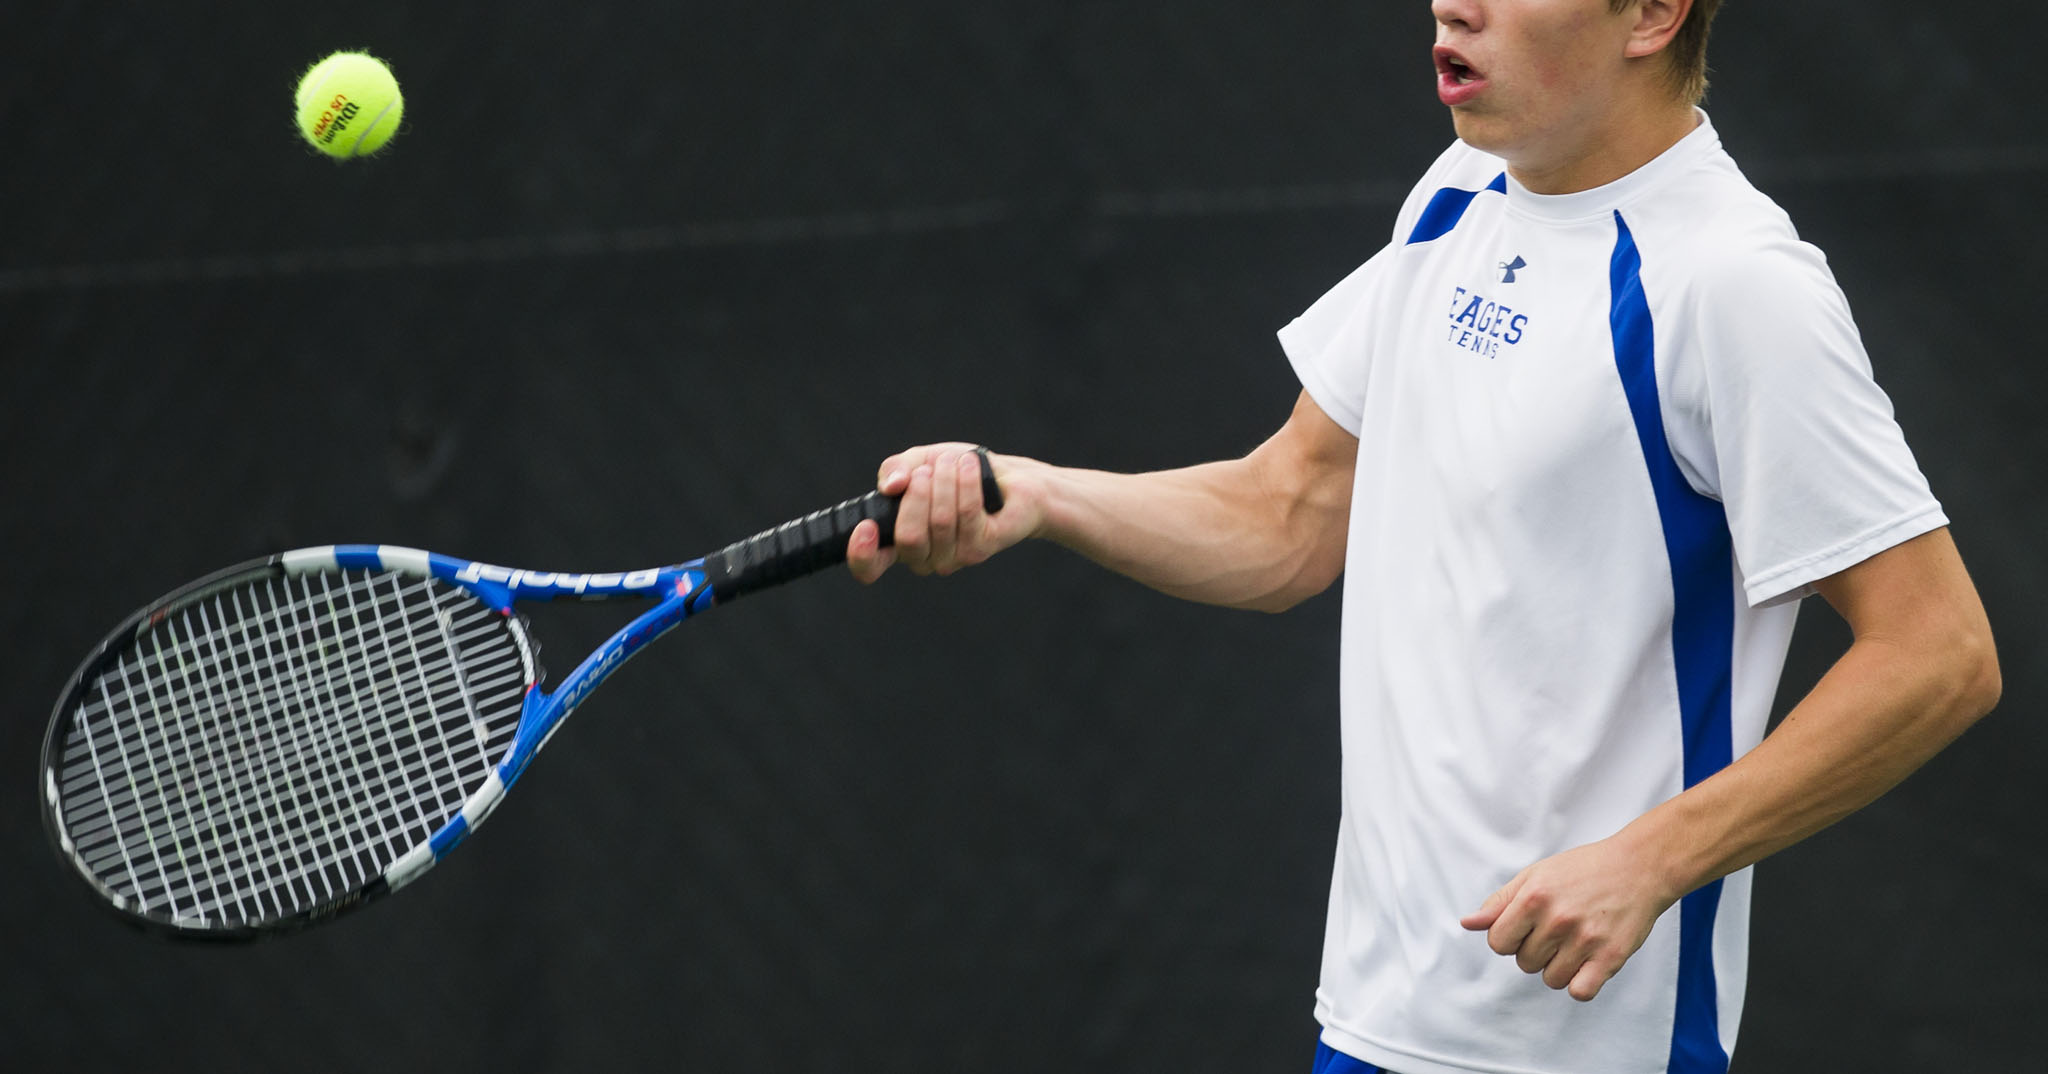 Brown County boys tennis player connecting with a forehand shot